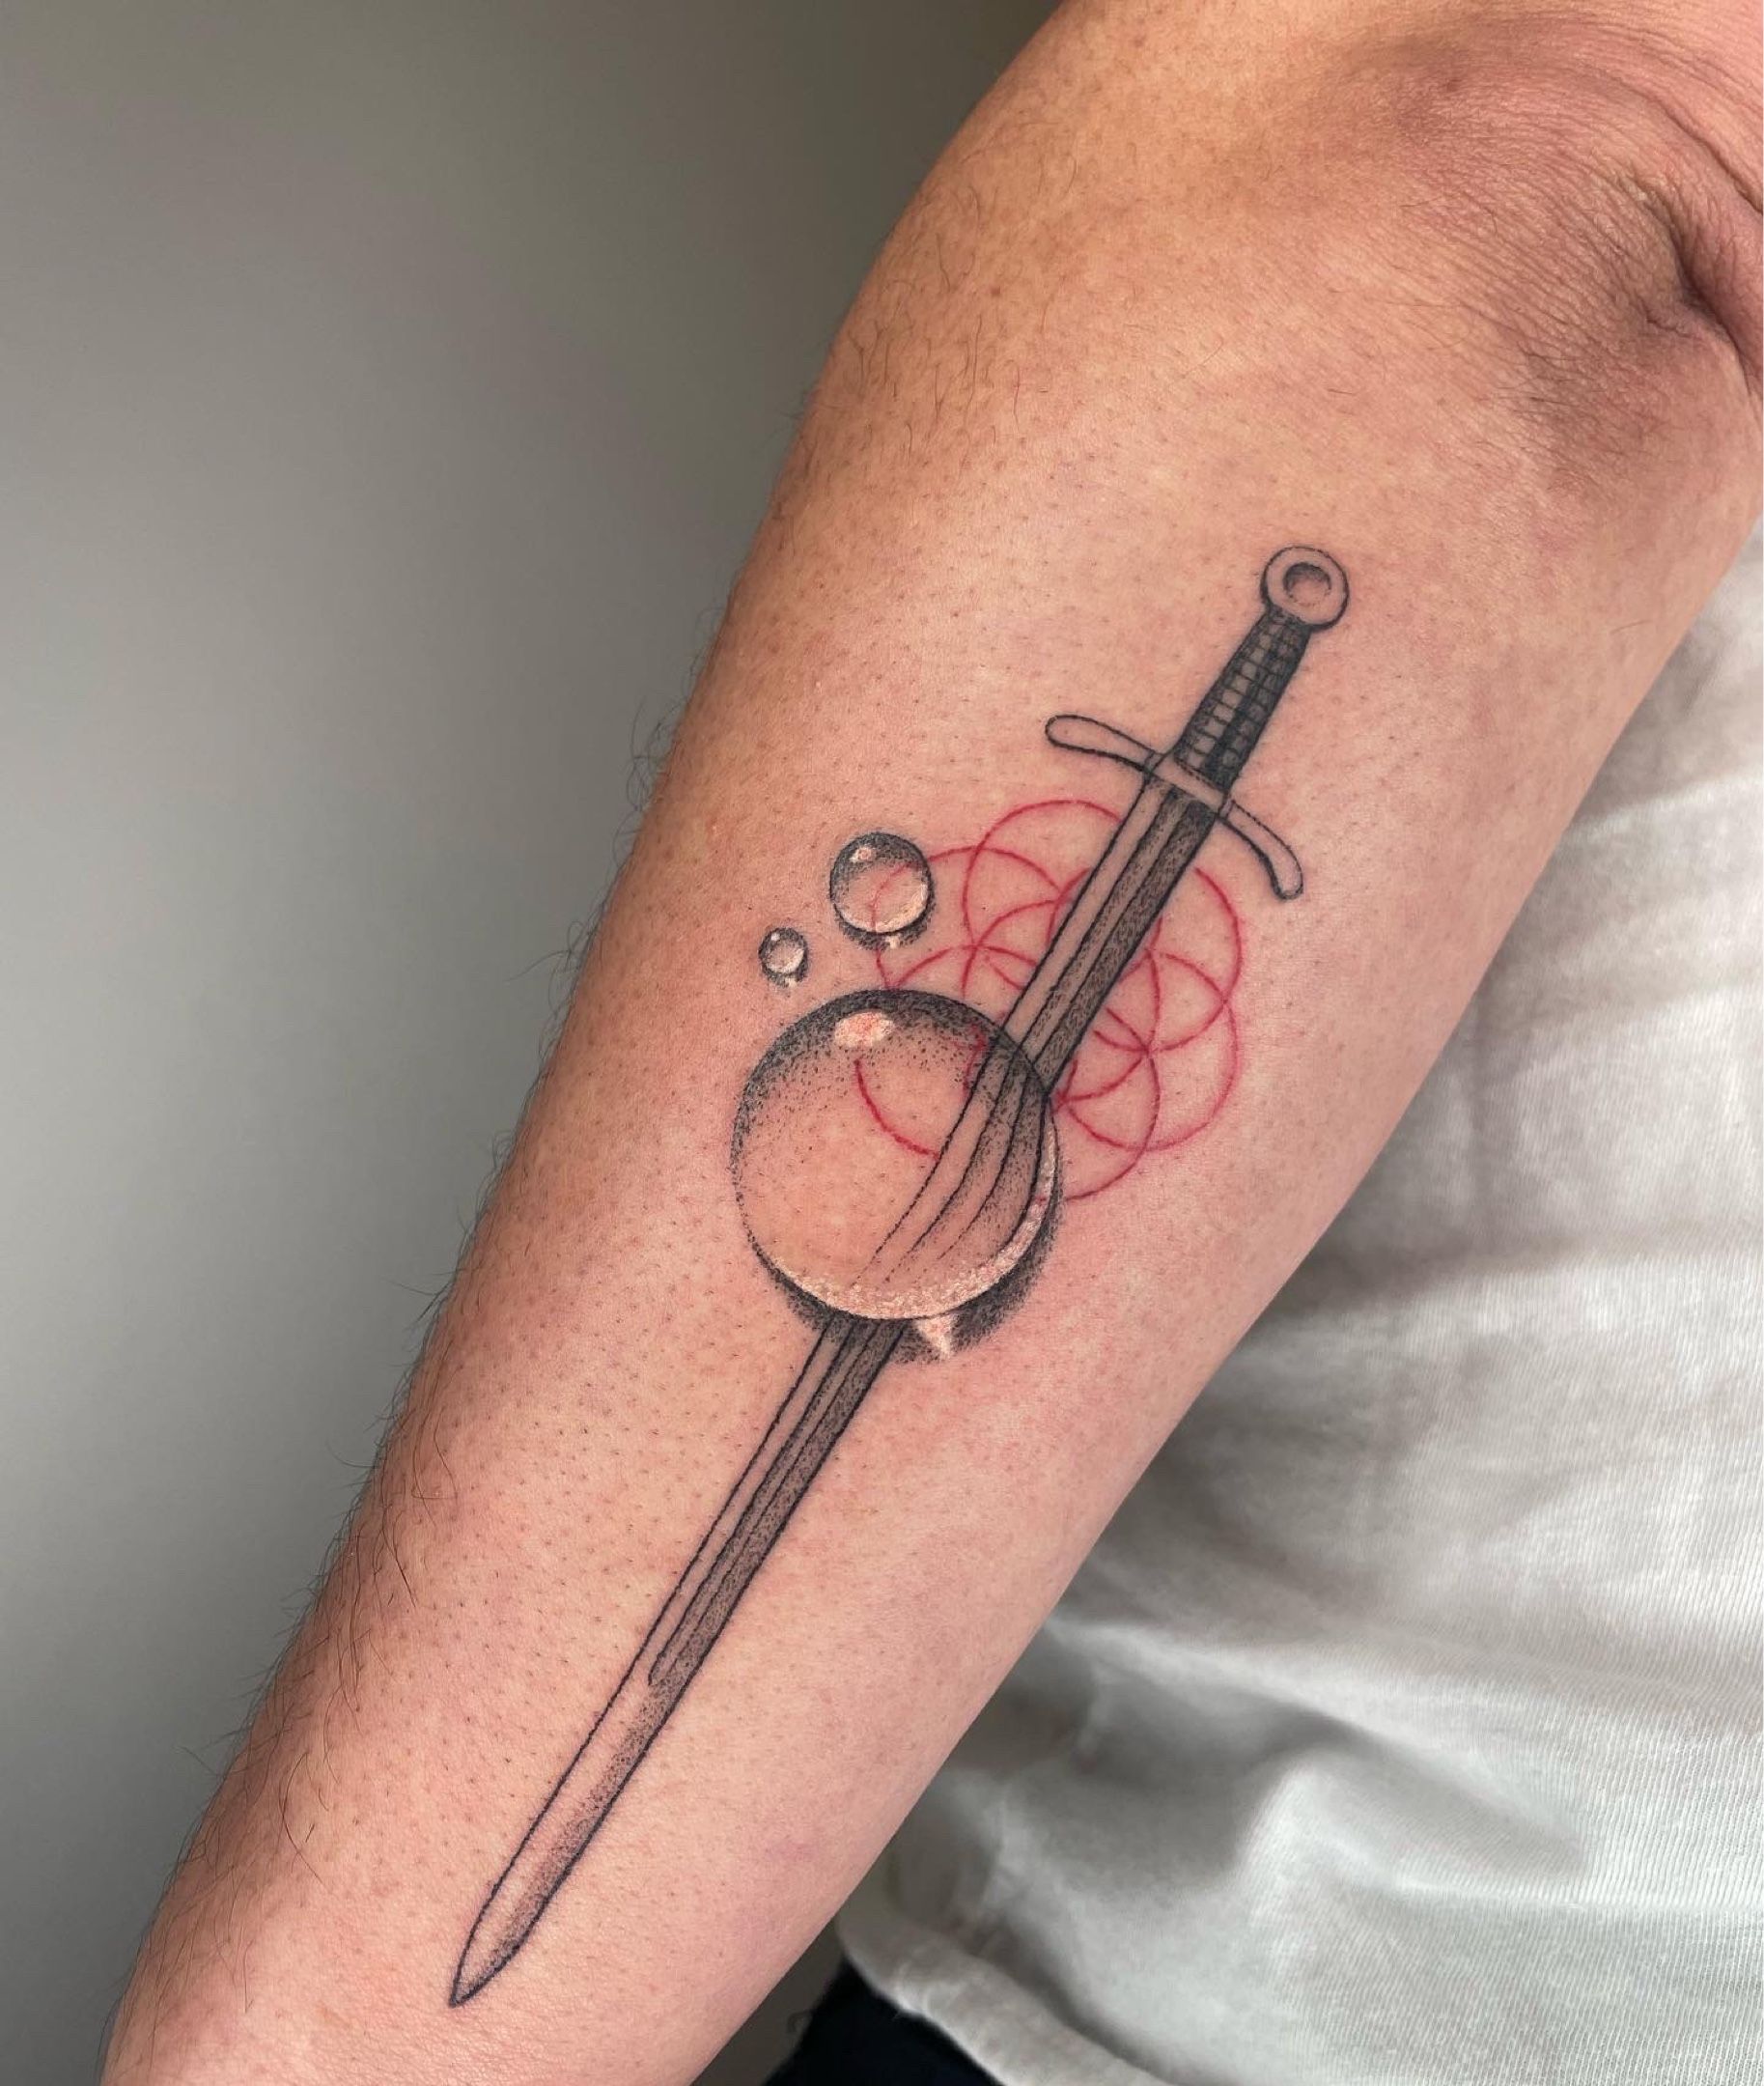 ACOUSTIC GUITAR AND VIOLIN WITH WINGS tattoo idea | TattoosAI